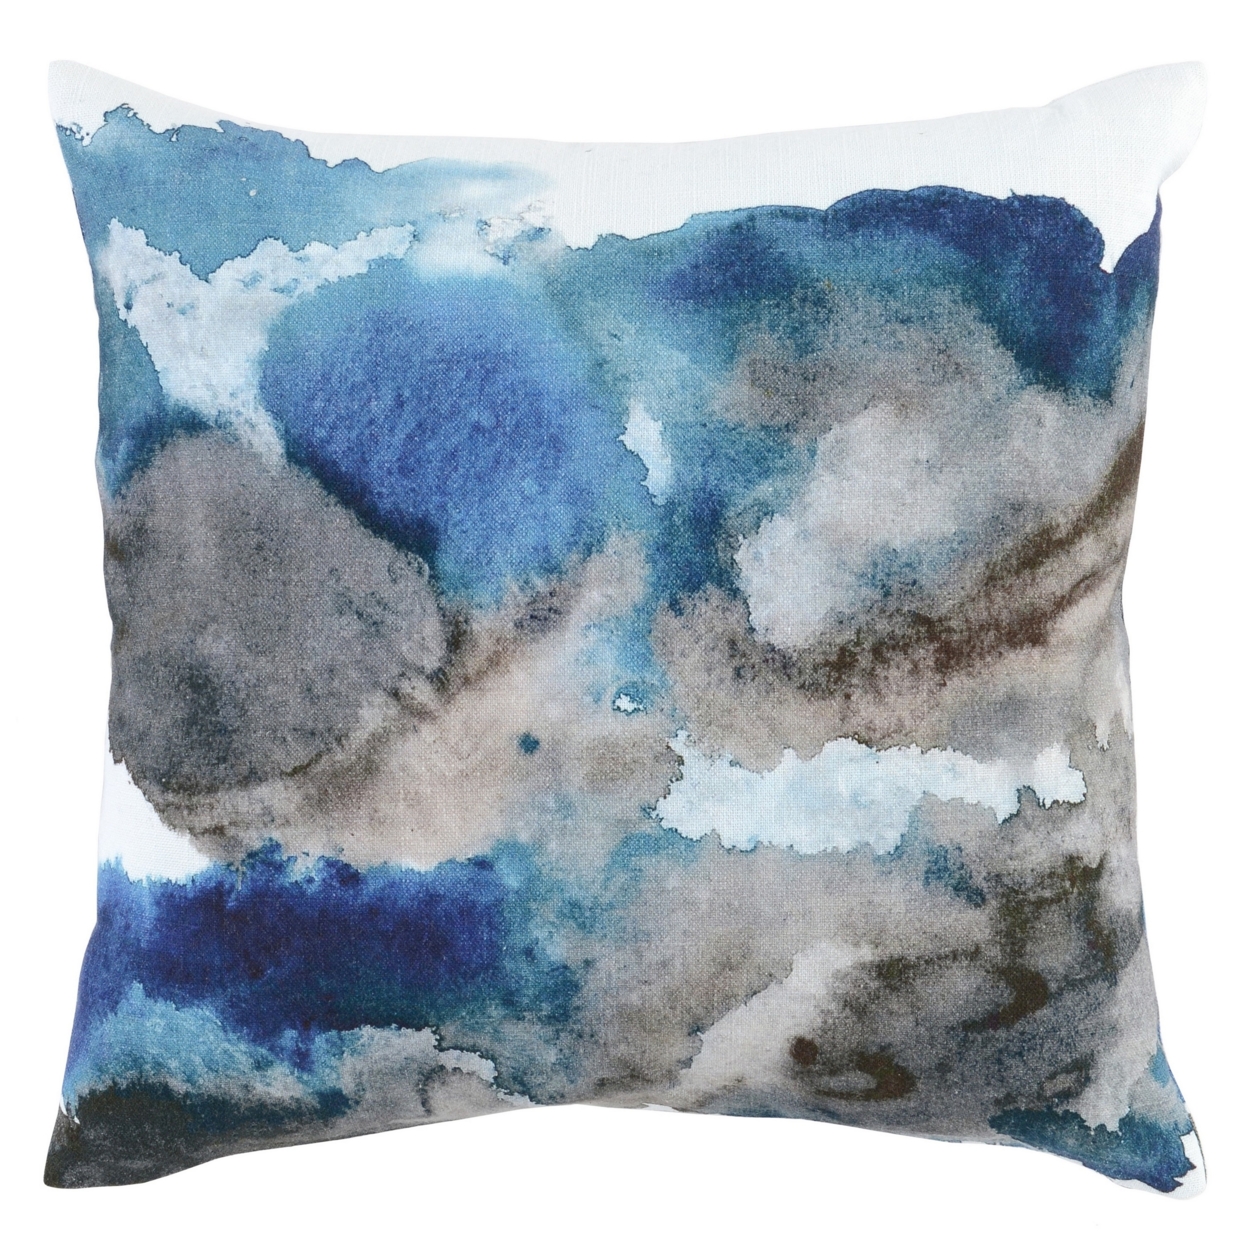 Square Fabric Throw Pillow With Water Color Prints, Blue And Gray- Saltoro Sherpi